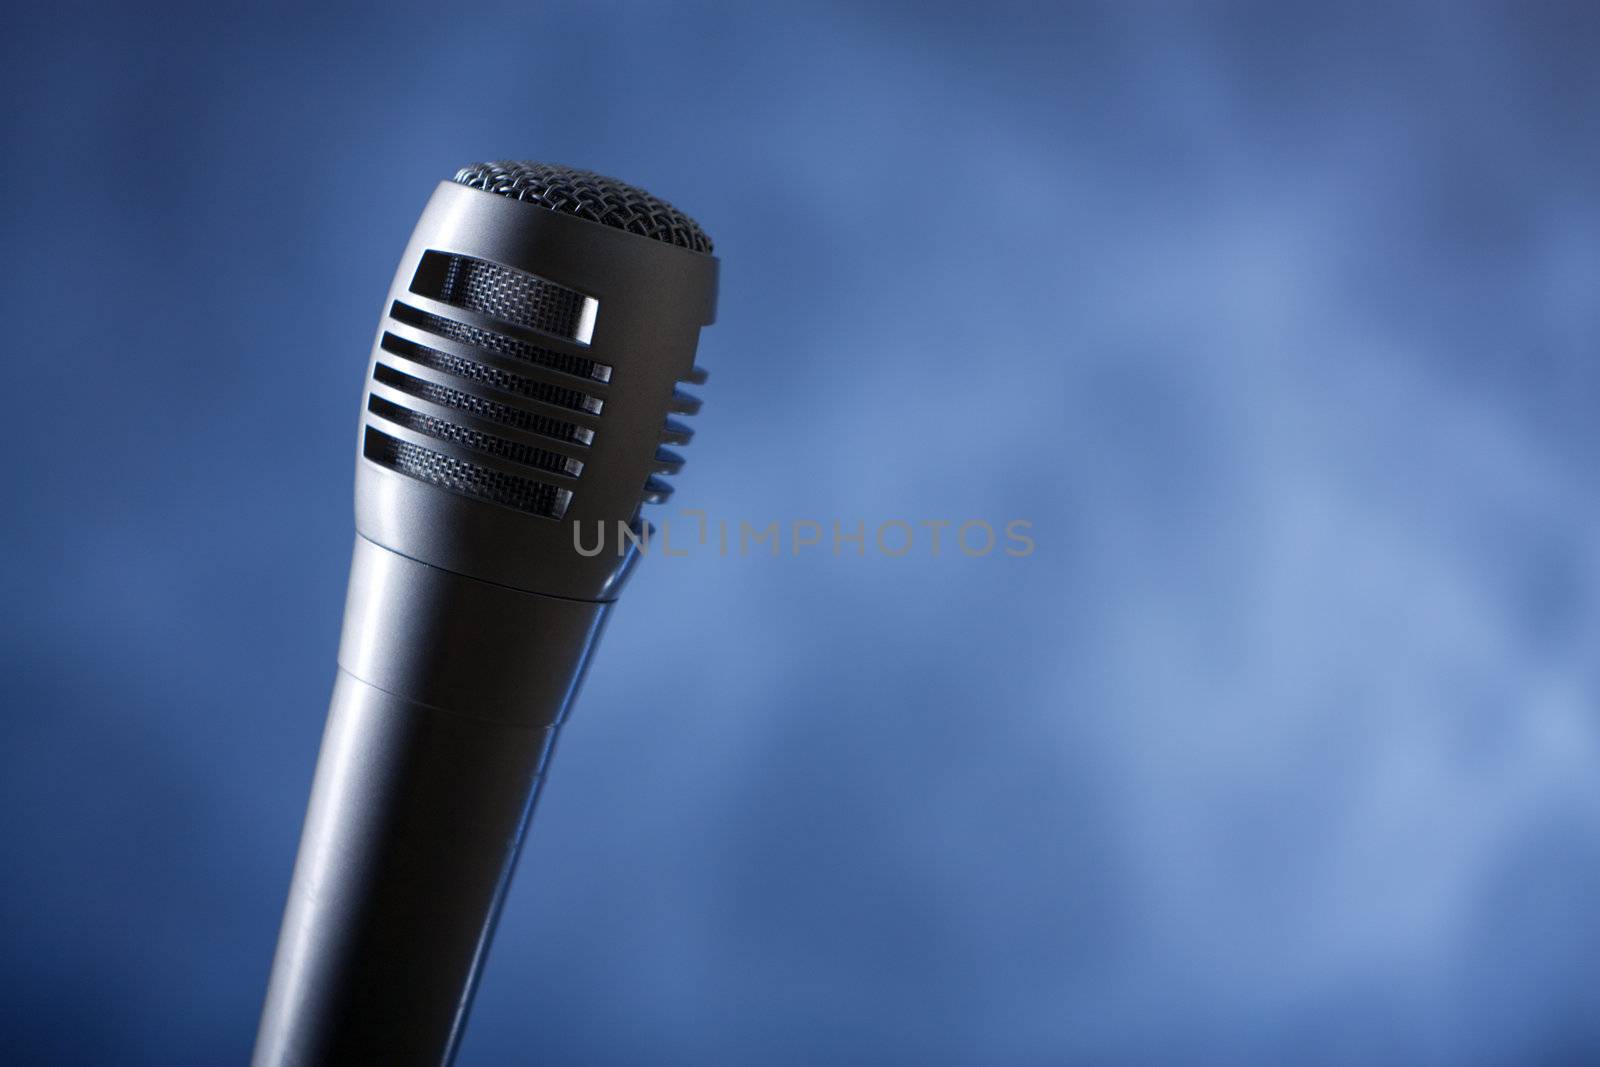 the single microphone on the dark background